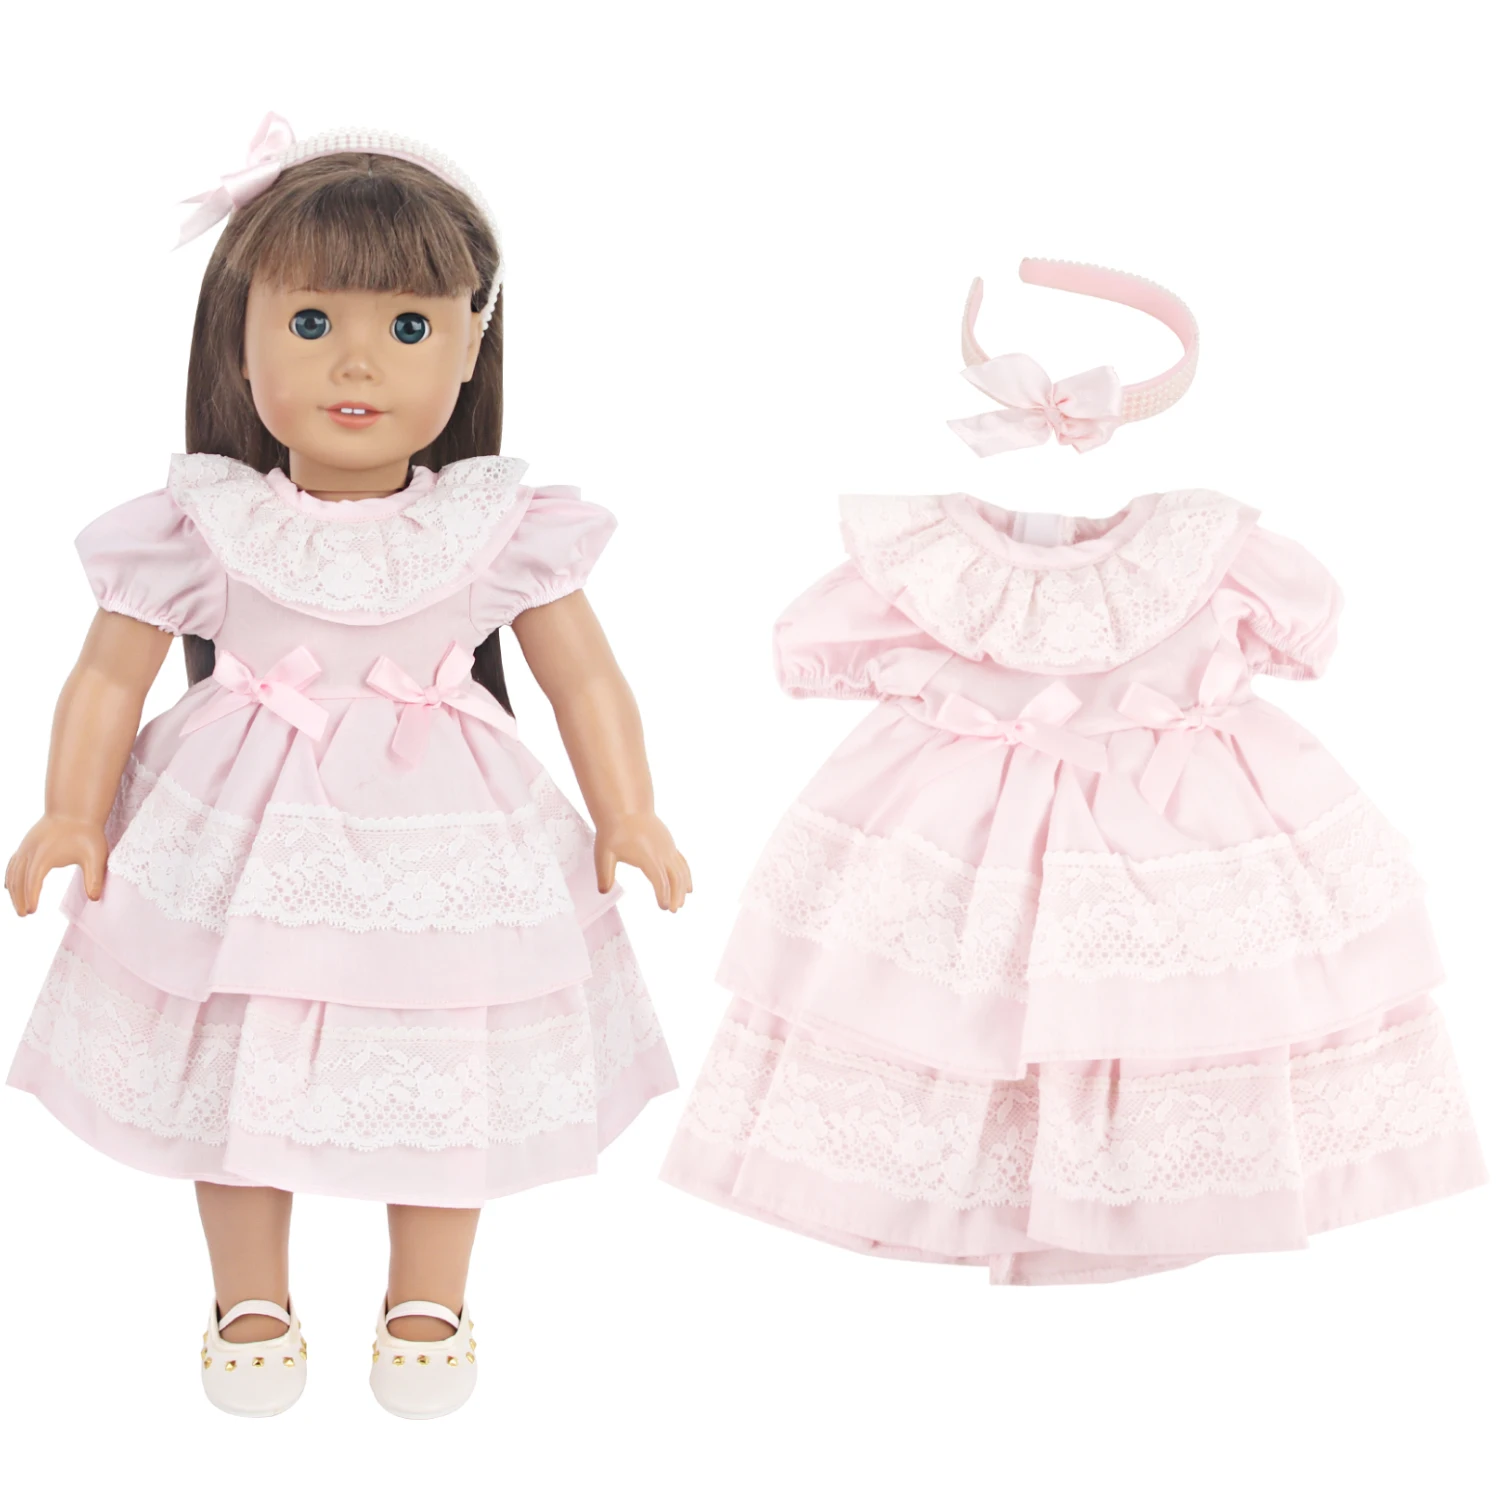 Hot Selling Doll Clothing Doll Pink Dress Clothes for 18 Inch American Doll Girl